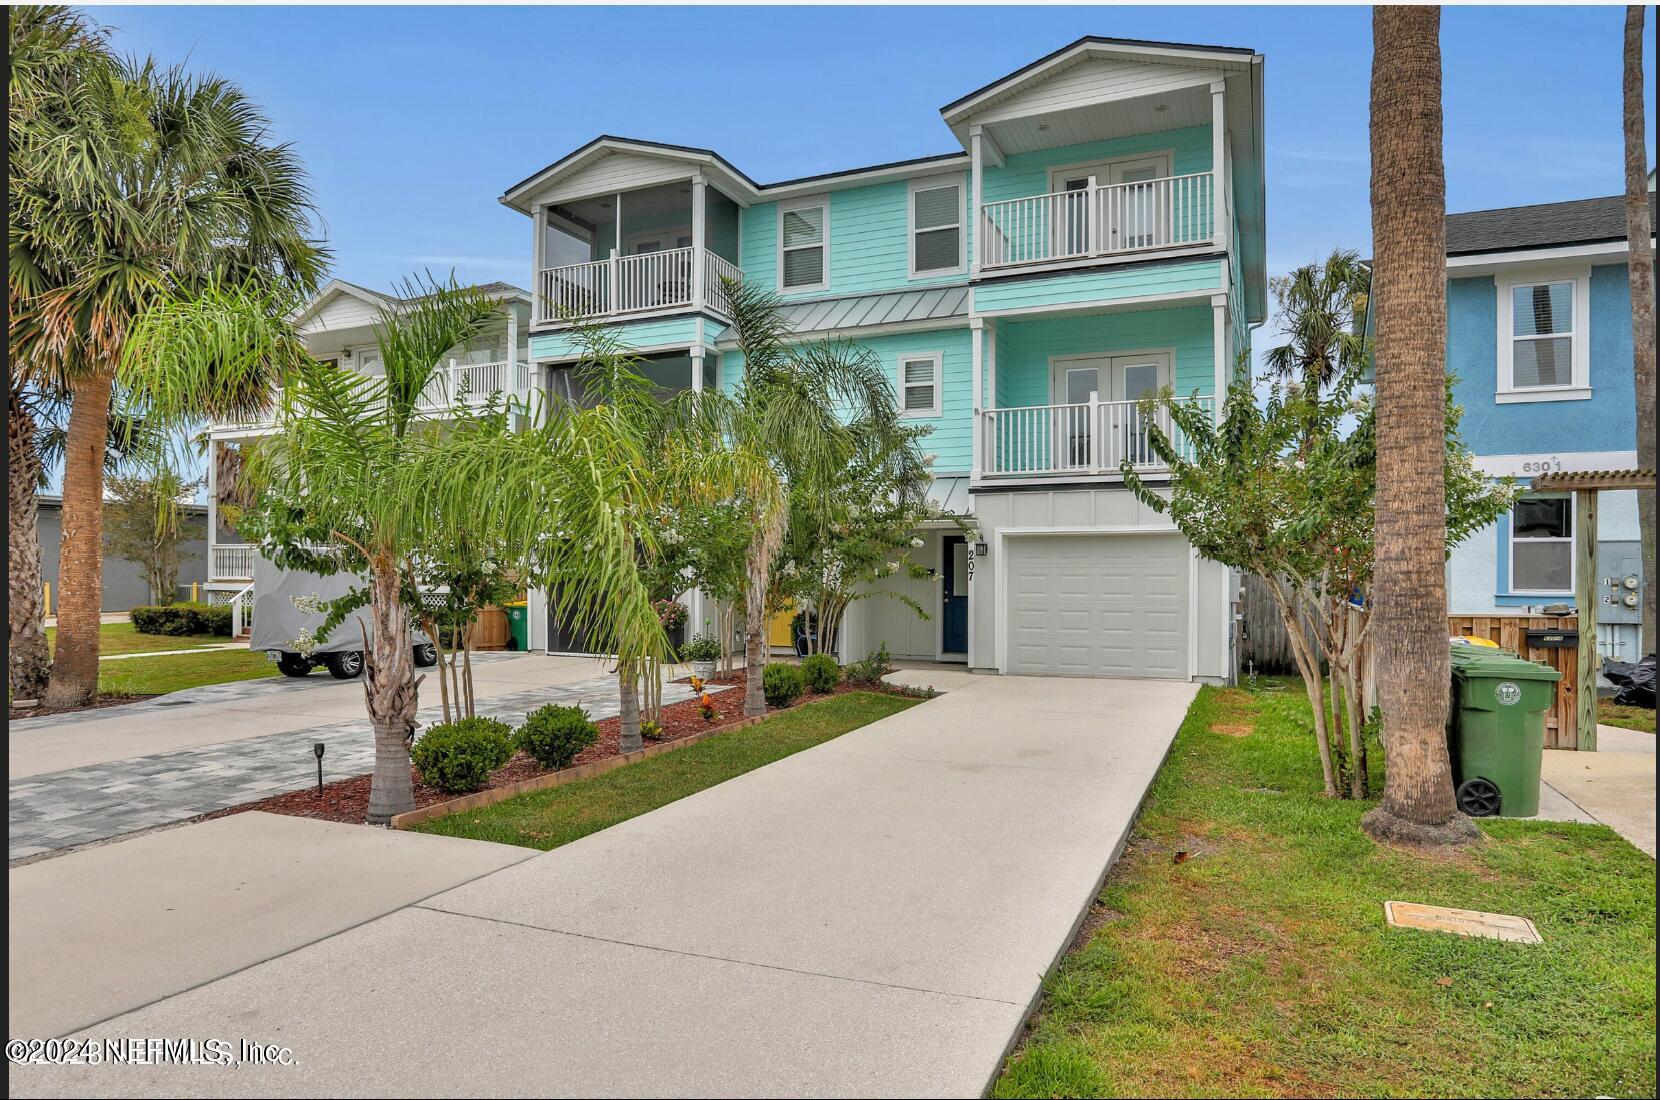 Jacksonville Beach, FL home for sale located at 207 7TH Avenue S, Jacksonville Beach, FL 32250